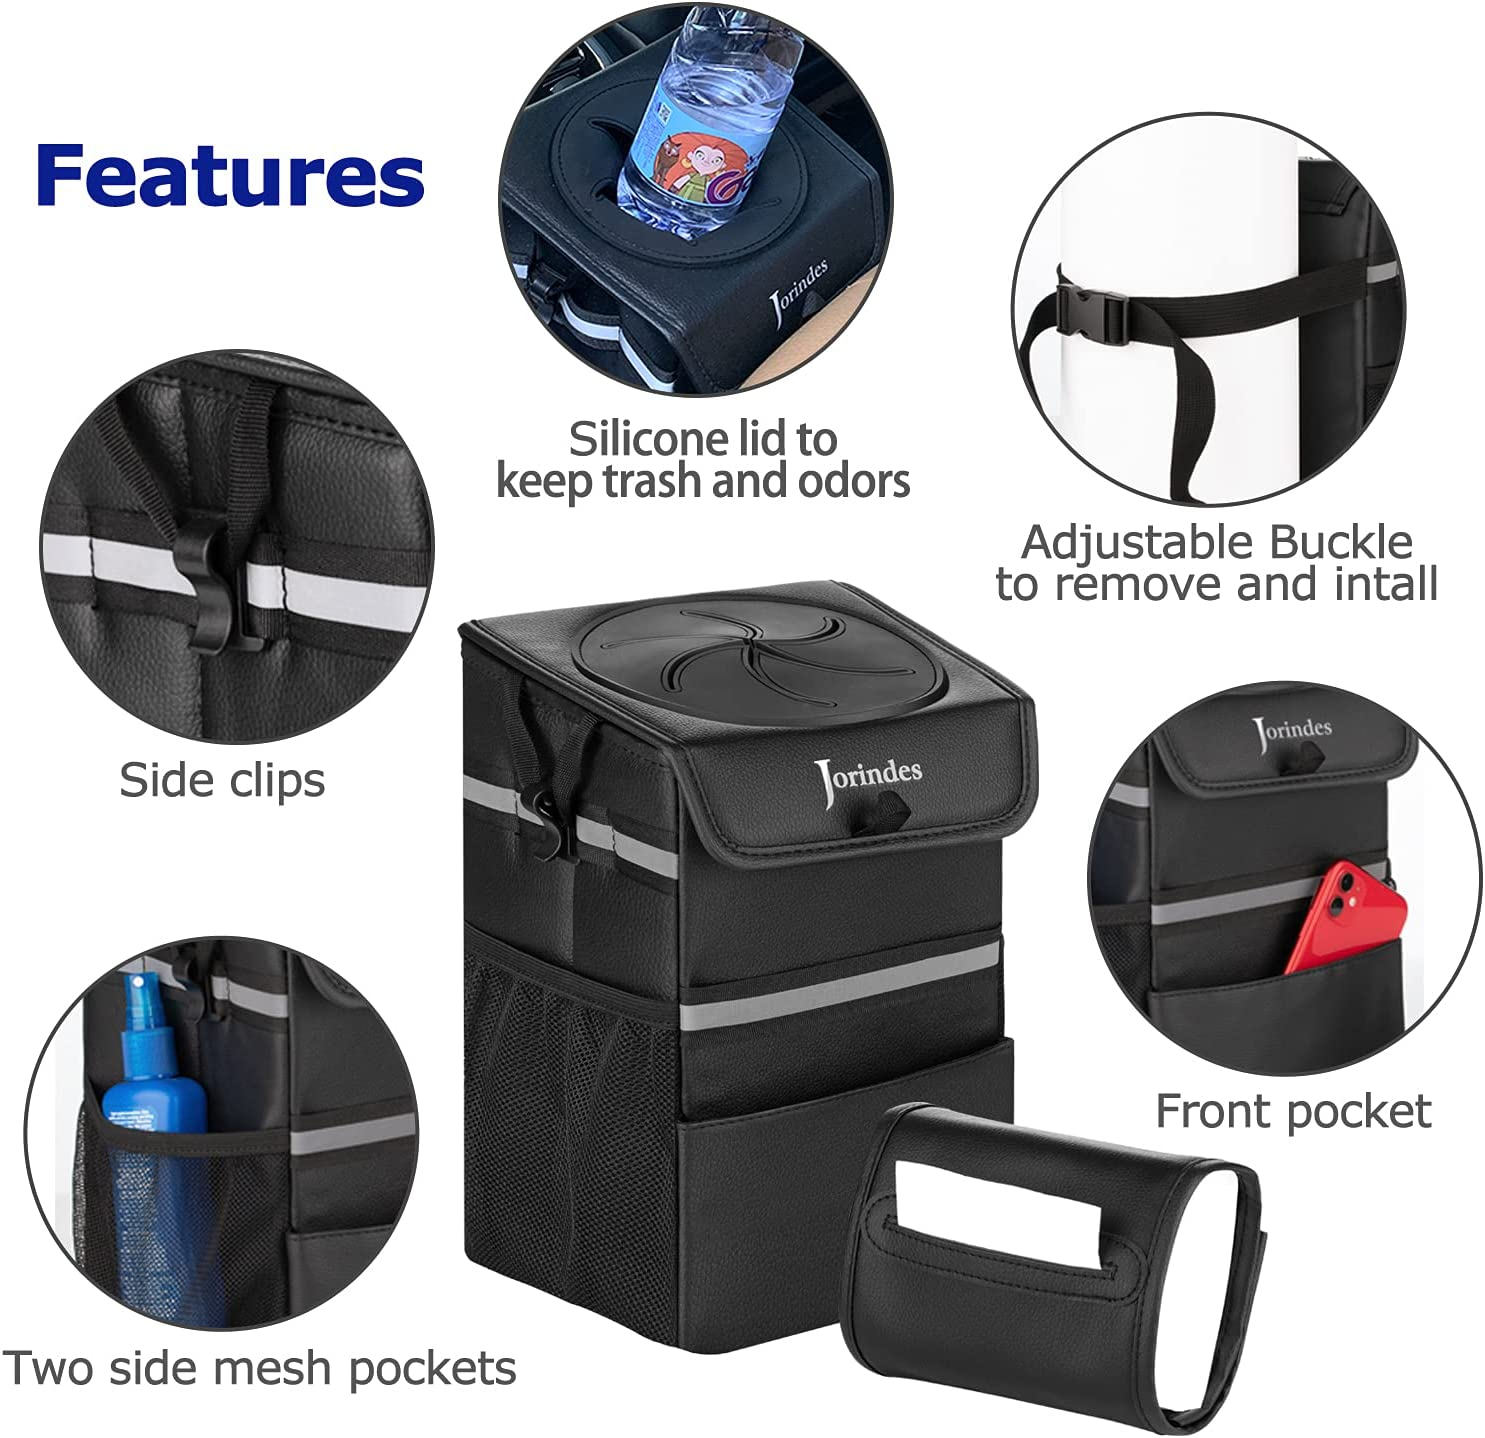 Large PU Leather Car Trash Can with Lid & Leak-Proof Liner, Elegant Car Accessories for Travel, Removable Tissue Holder & Car Garbage Bag Hanging with Strap, Auto Trash Bin,Vehicle Waster Container